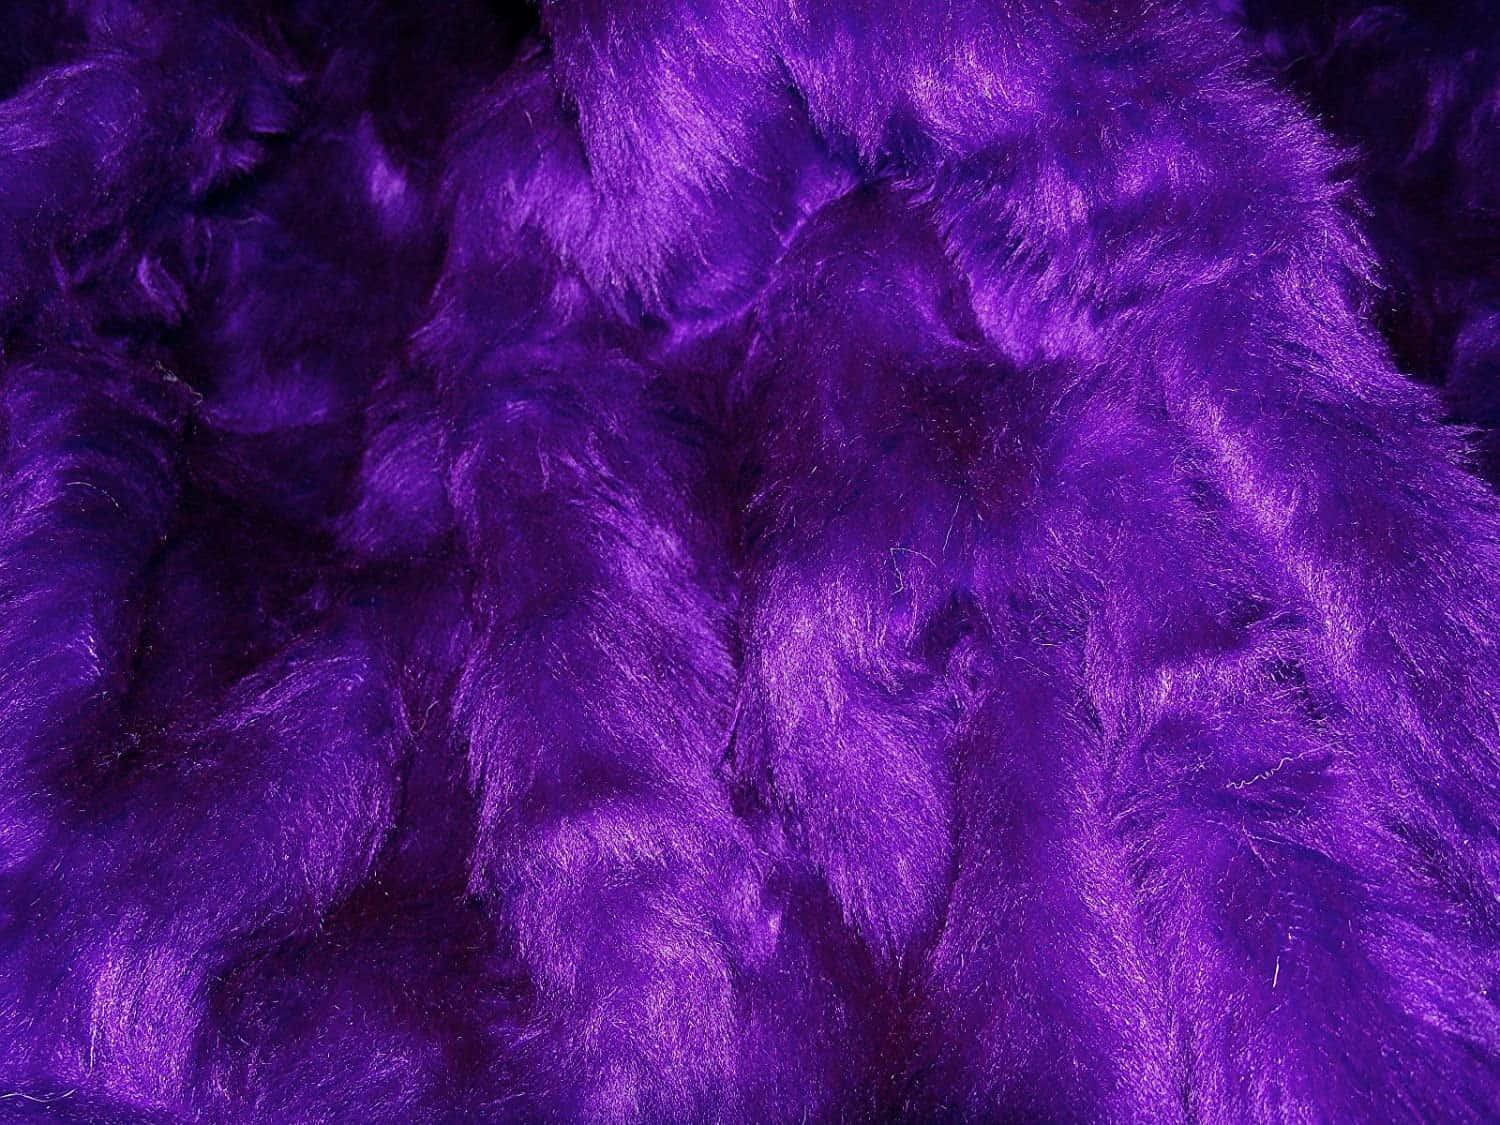 Stand out in bold style with Purple Fur Wallpaper